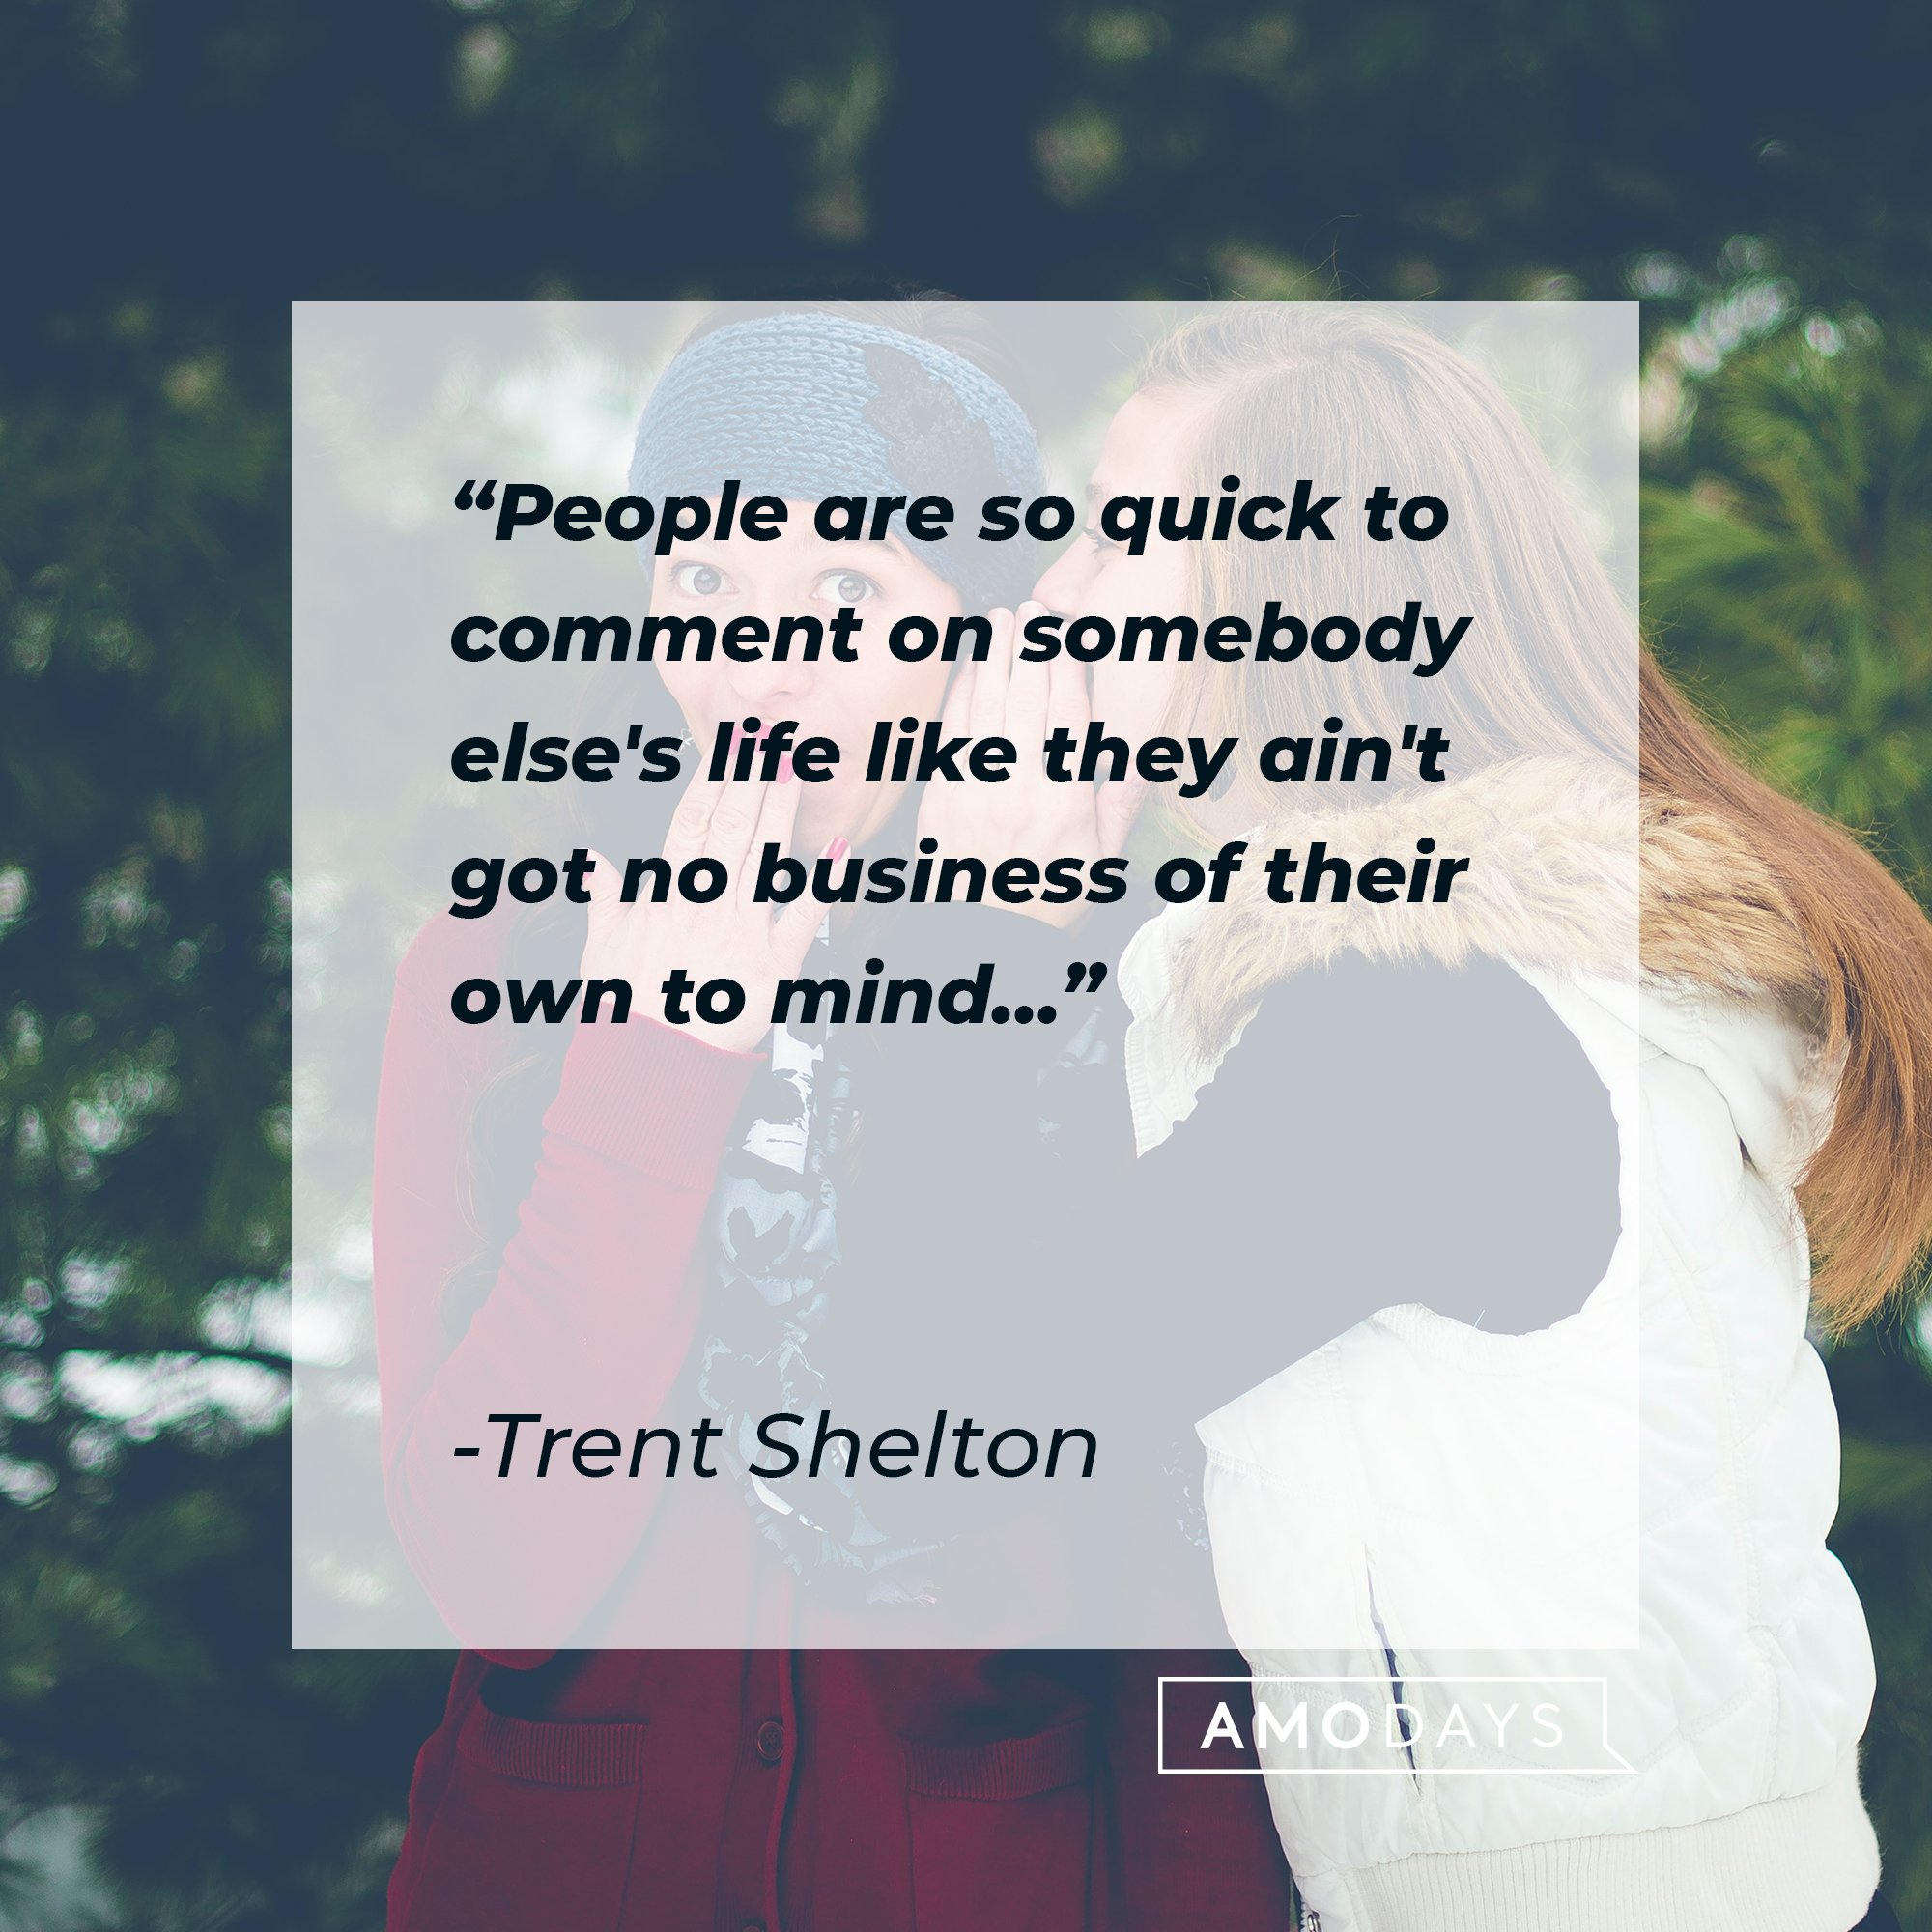  Trent Shelton's quote: "People are so quick to comment on somebody else's life like they ain't got no business of their own to mind…" | Image: AmoDays